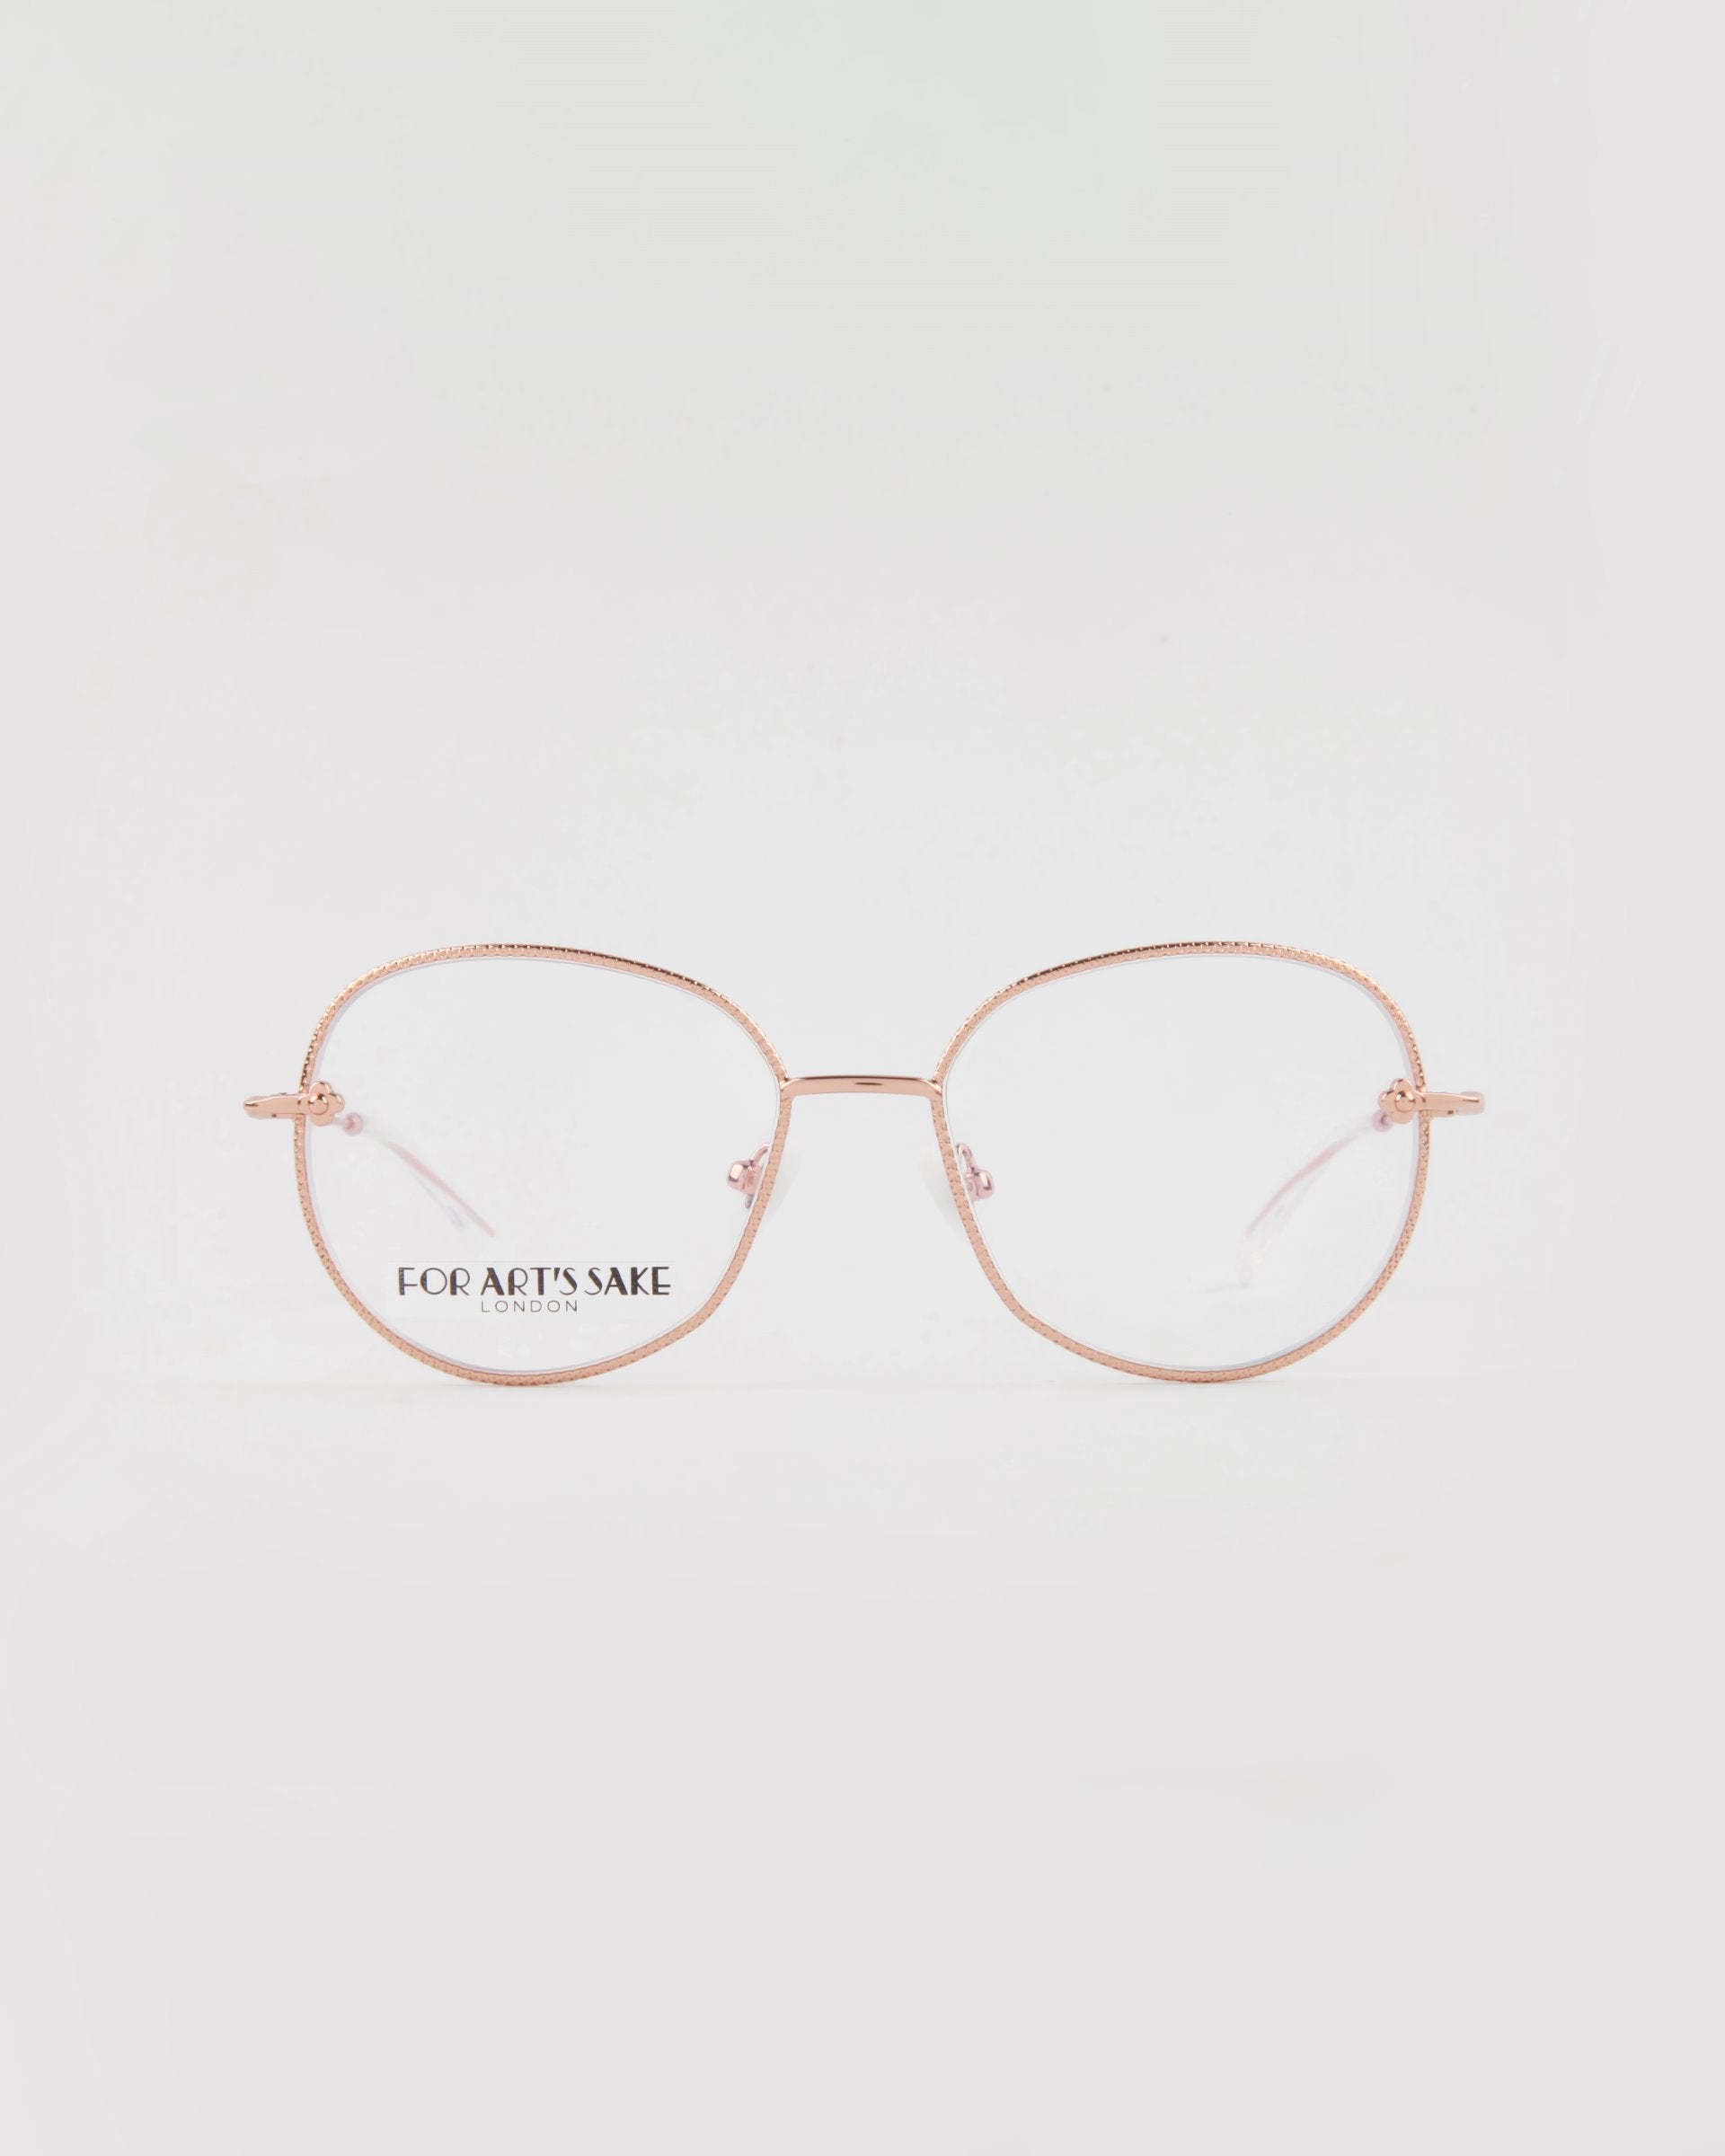 A pair of gold-plated stainless steel eyeglasses with round clear lenses. The glasses have thin gold temples and a lightweight design. The brand name &quot;For Art&#39;s Sake®&quot; and &quot;LONDON&quot; are printed on the left lens. This handmade Jasmine eyewear features a white, clean background for showcasing elegance.